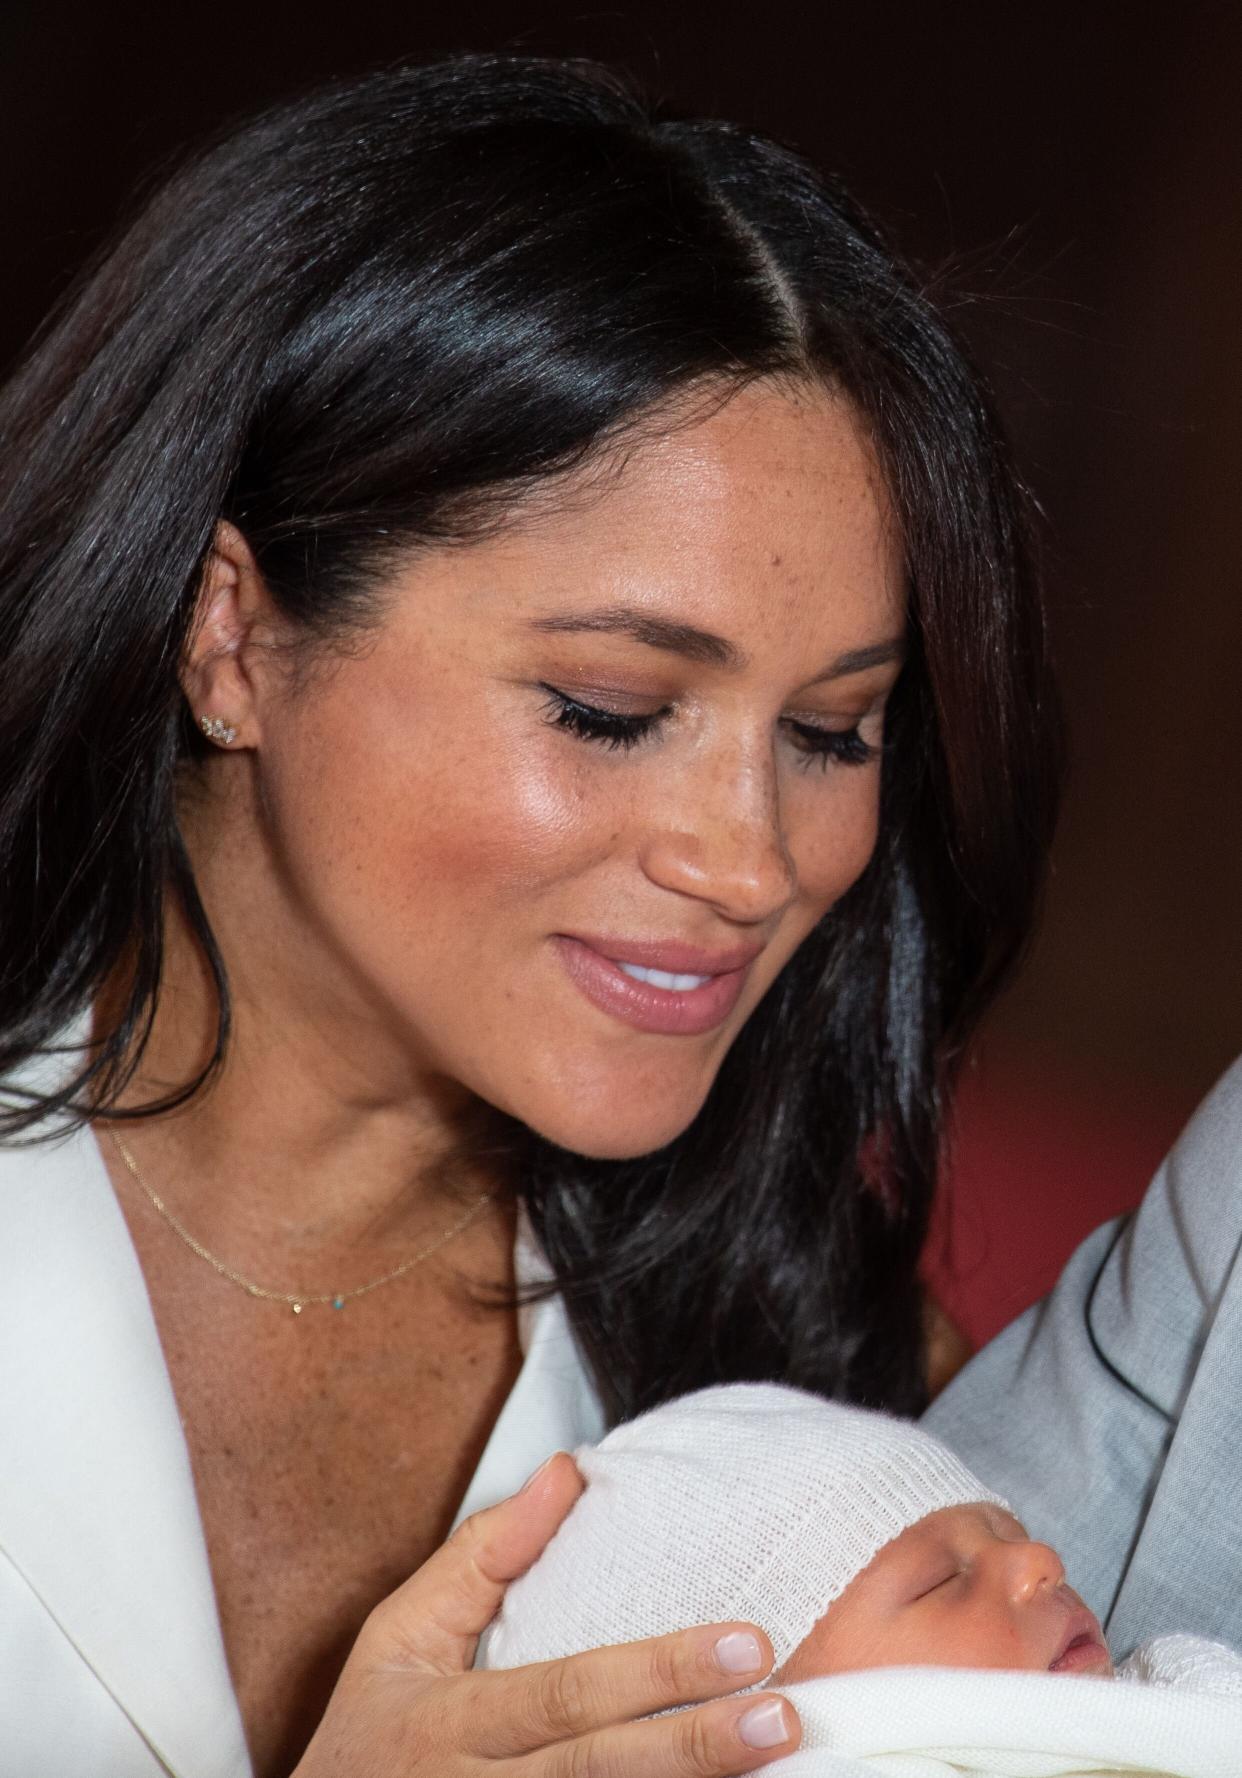 Meghan Markle is pictured lovingly gazing down at her son, Archie, who was in Prince Harry's arms. Photo: Getty Images